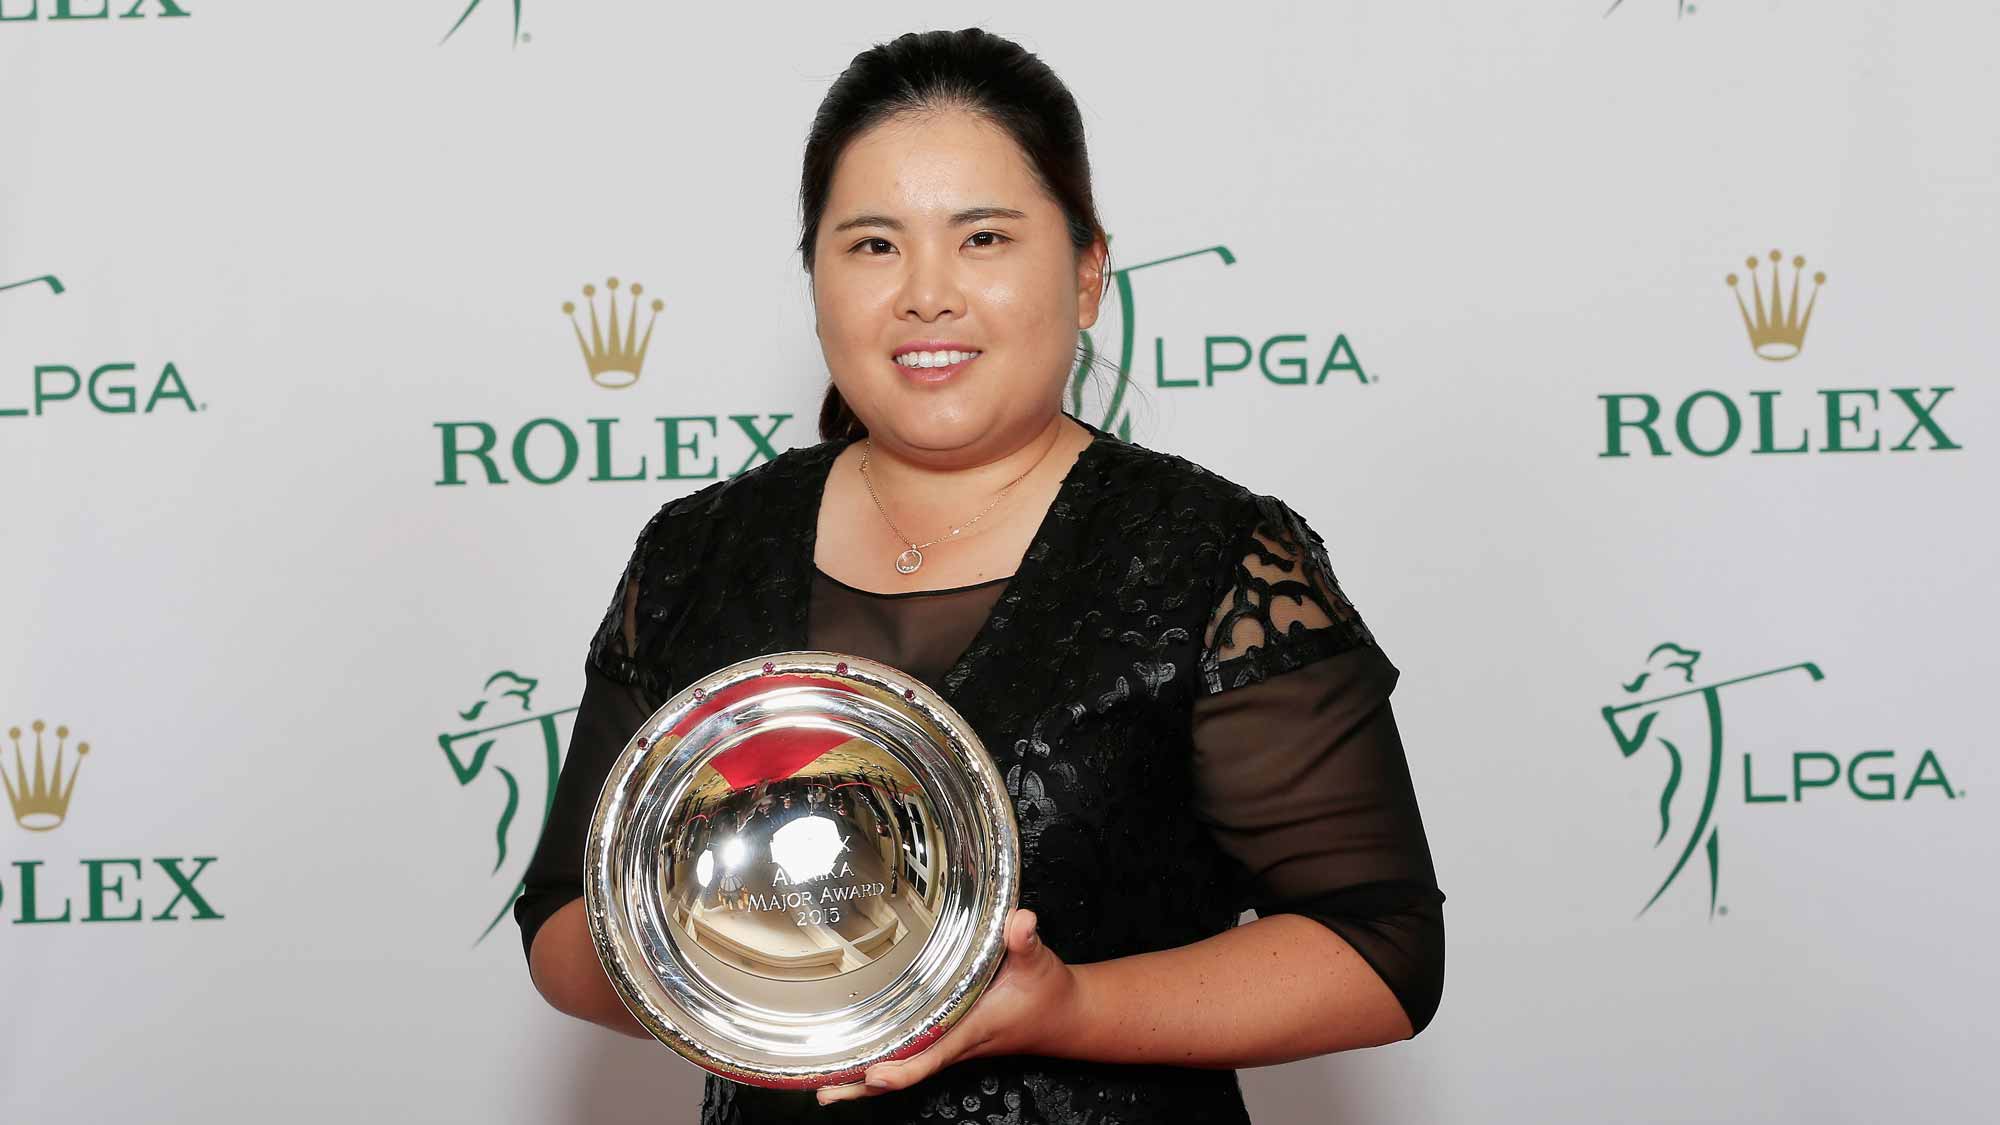 Inbee Park of South Korea poses with the Rolex Annika Major Award during the LPGA Rolex Players Awards at the Ritz-Carlton, Naples